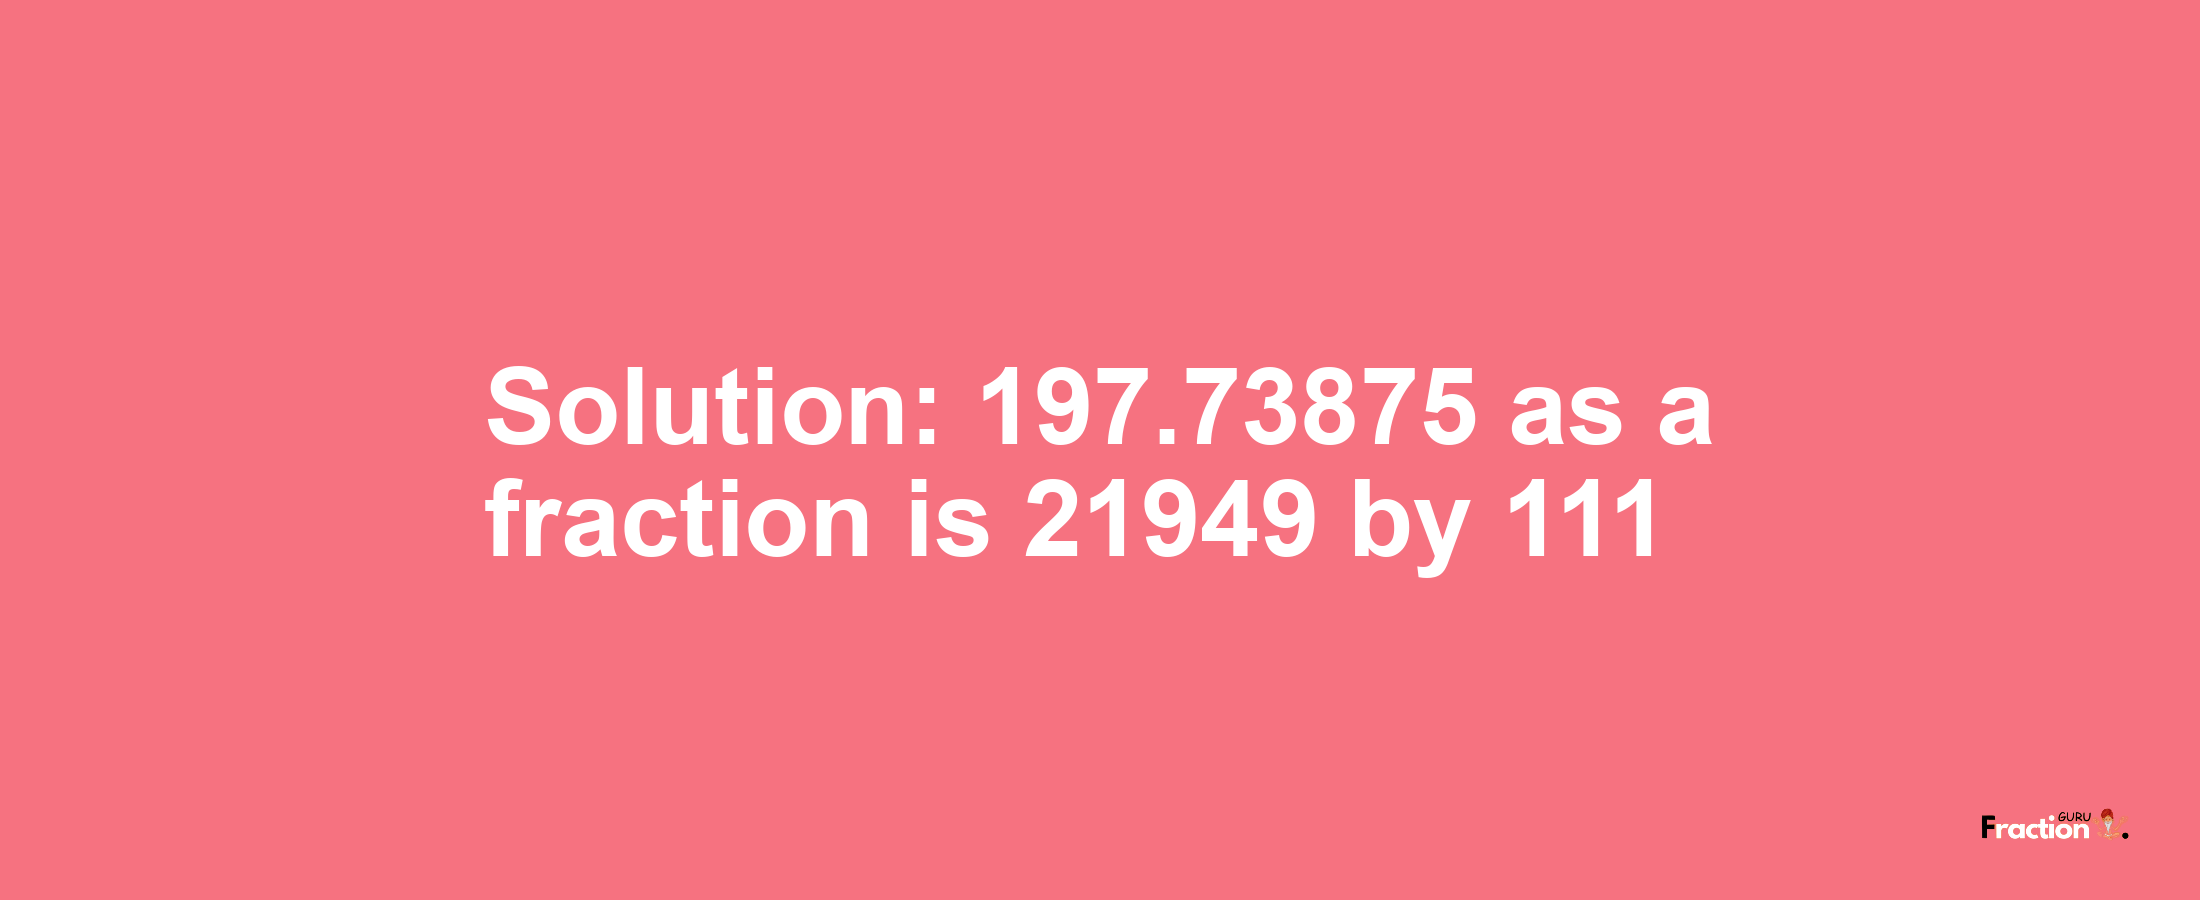 Solution:197.73875 as a fraction is 21949/111